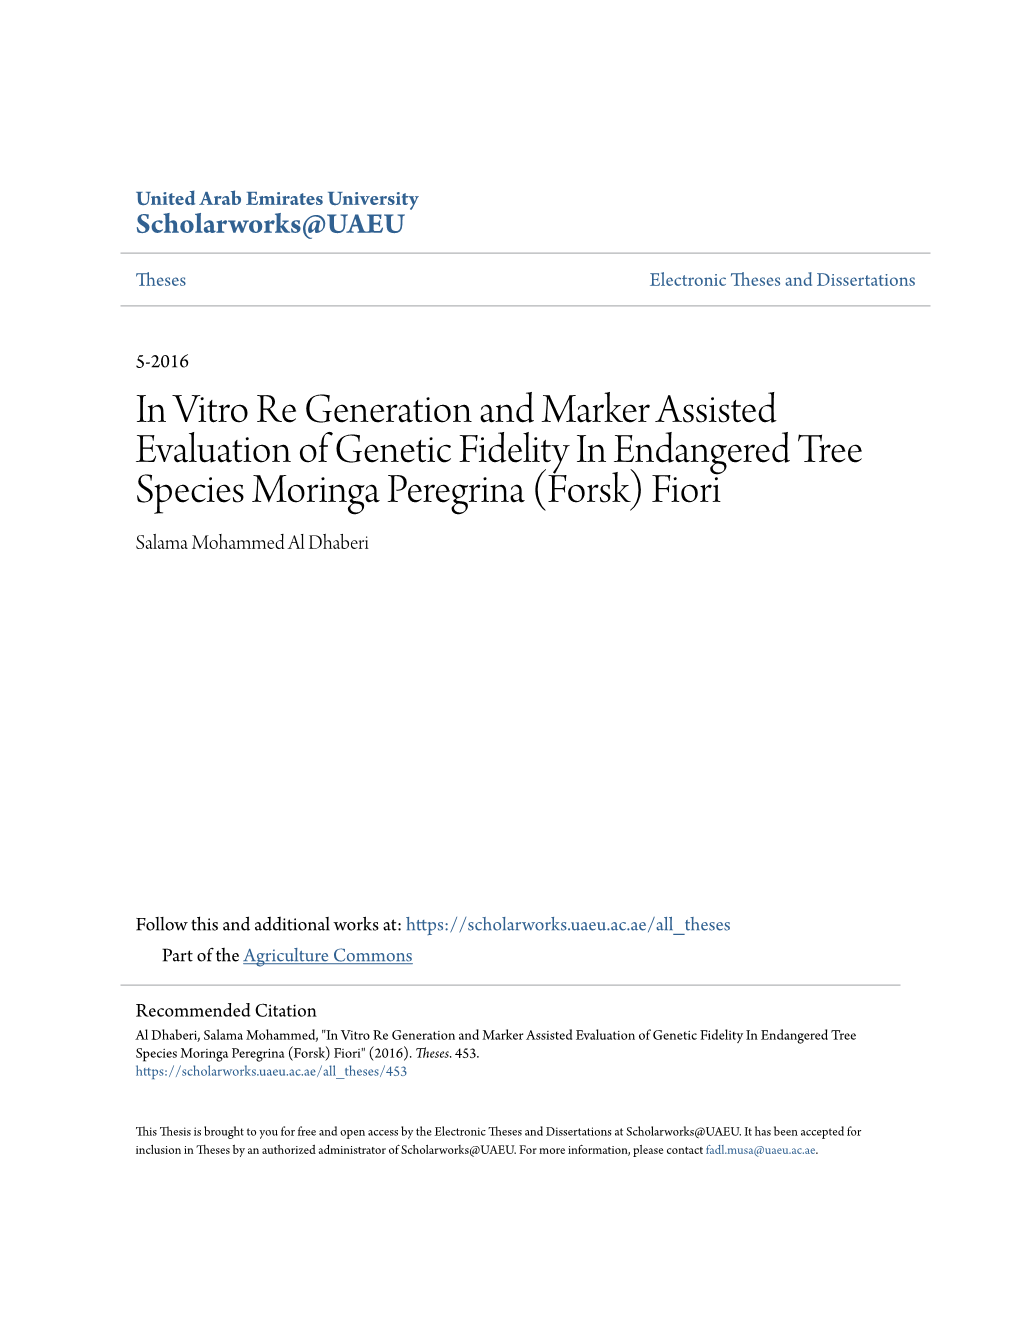 In Vitro Re Generation and Marker Assisted Evaluation of Genetic Fidelity in Endangered Tree Species Moringa Peregrina (Forsk) Fiori Salama Mohammed Al Dhaberi